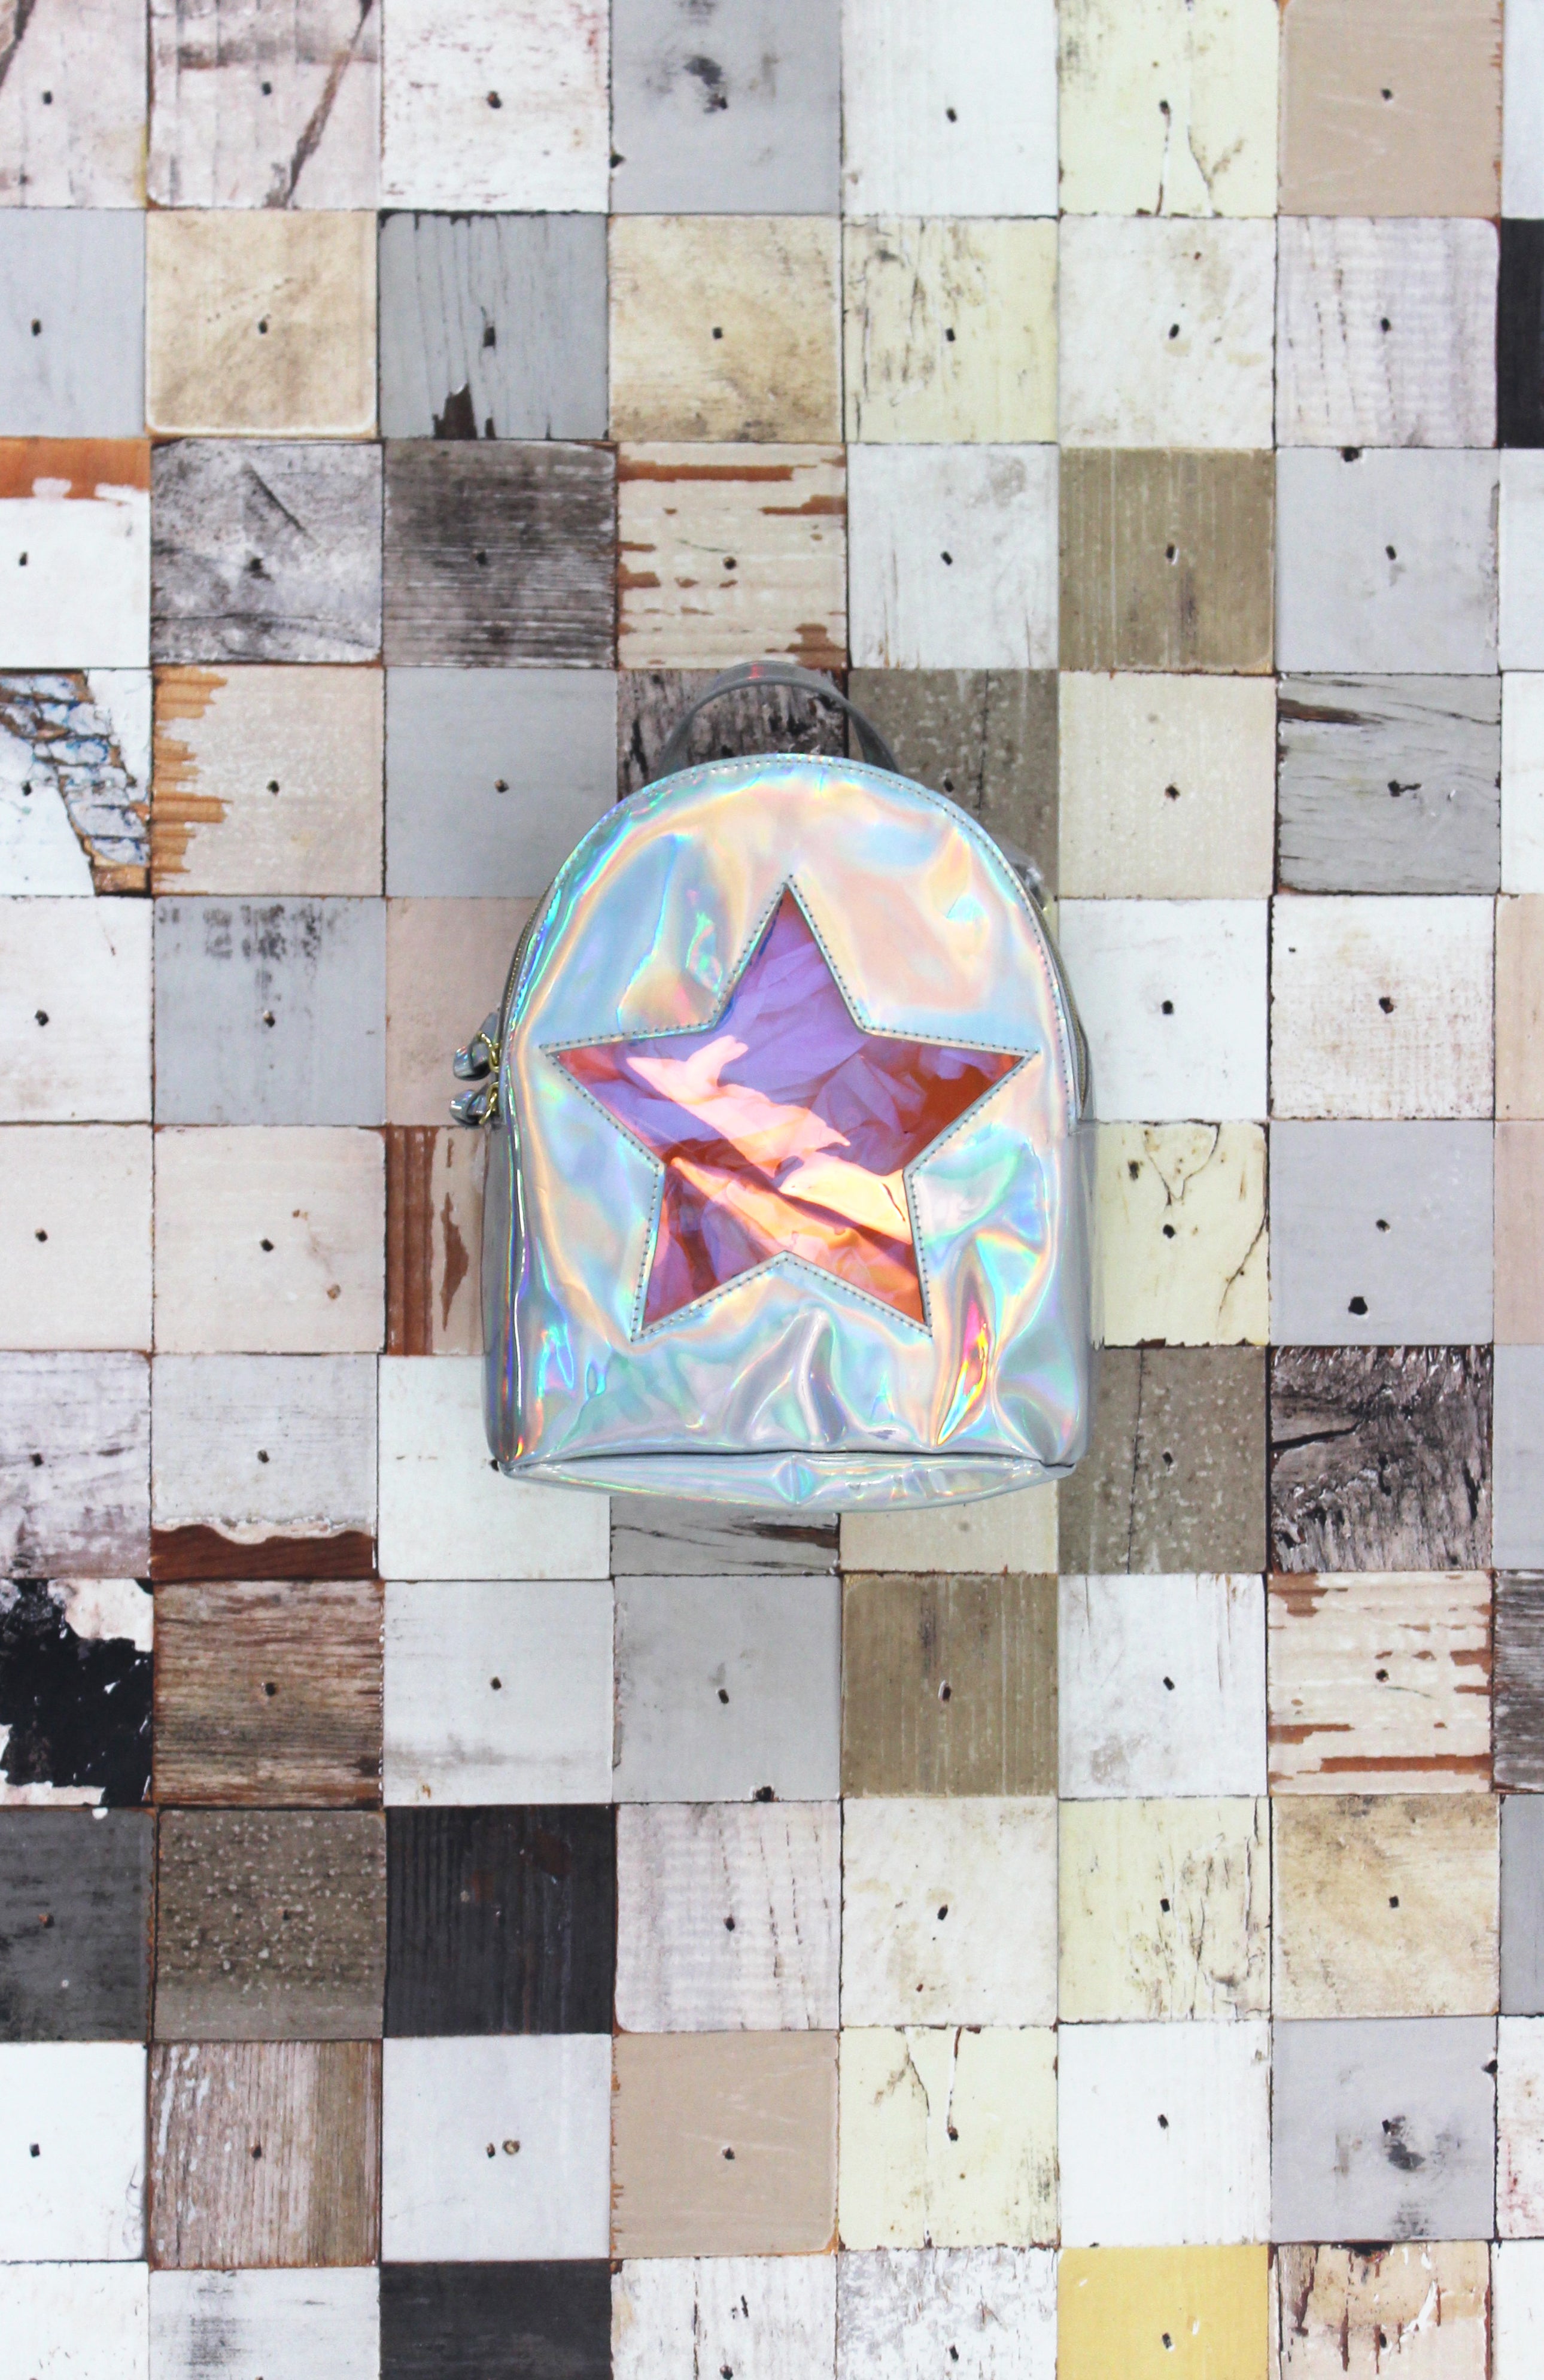 Holographic Star Backpack in Silver